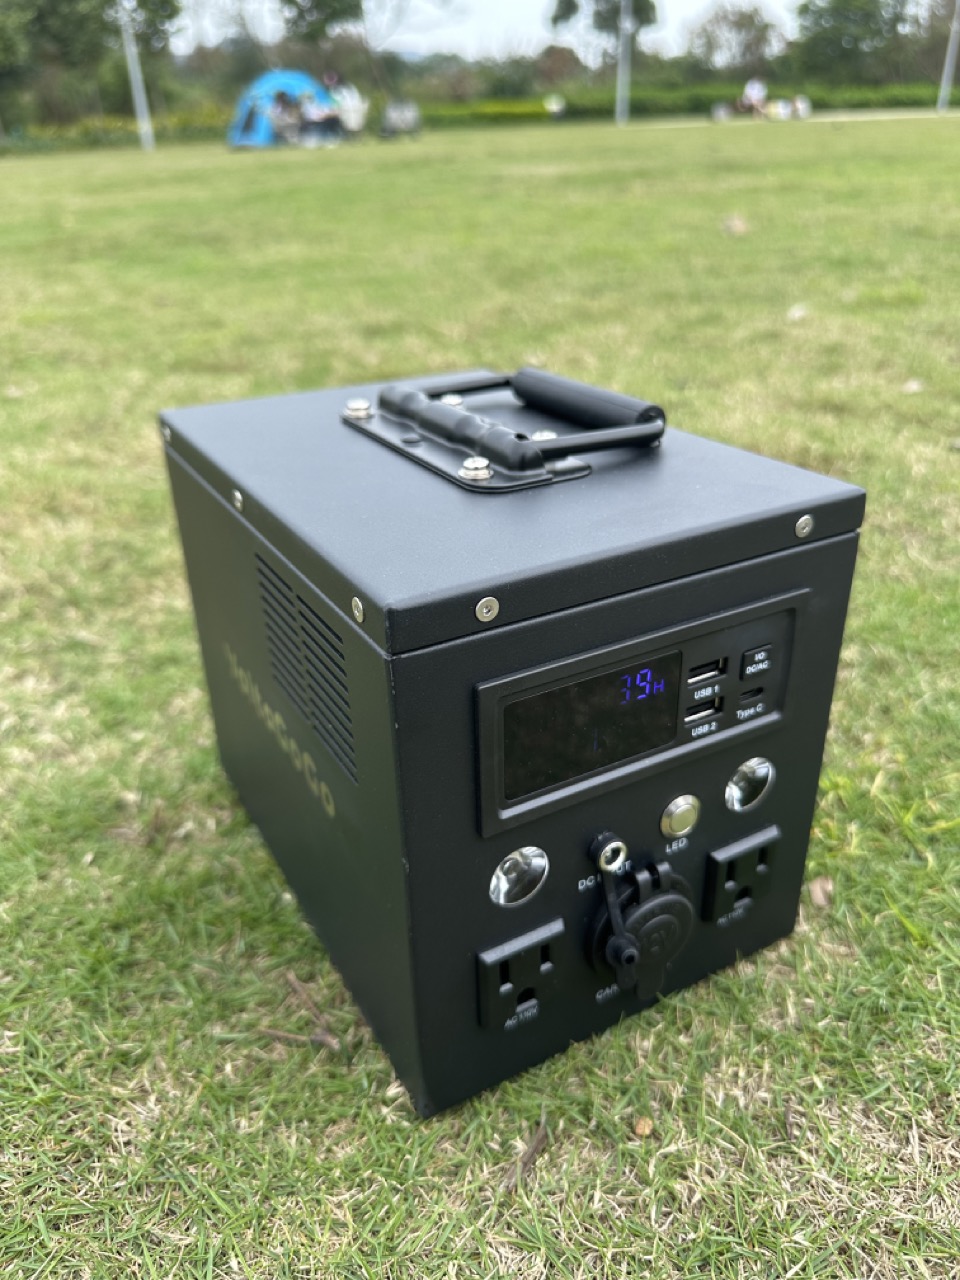 250w portable power station for traveling